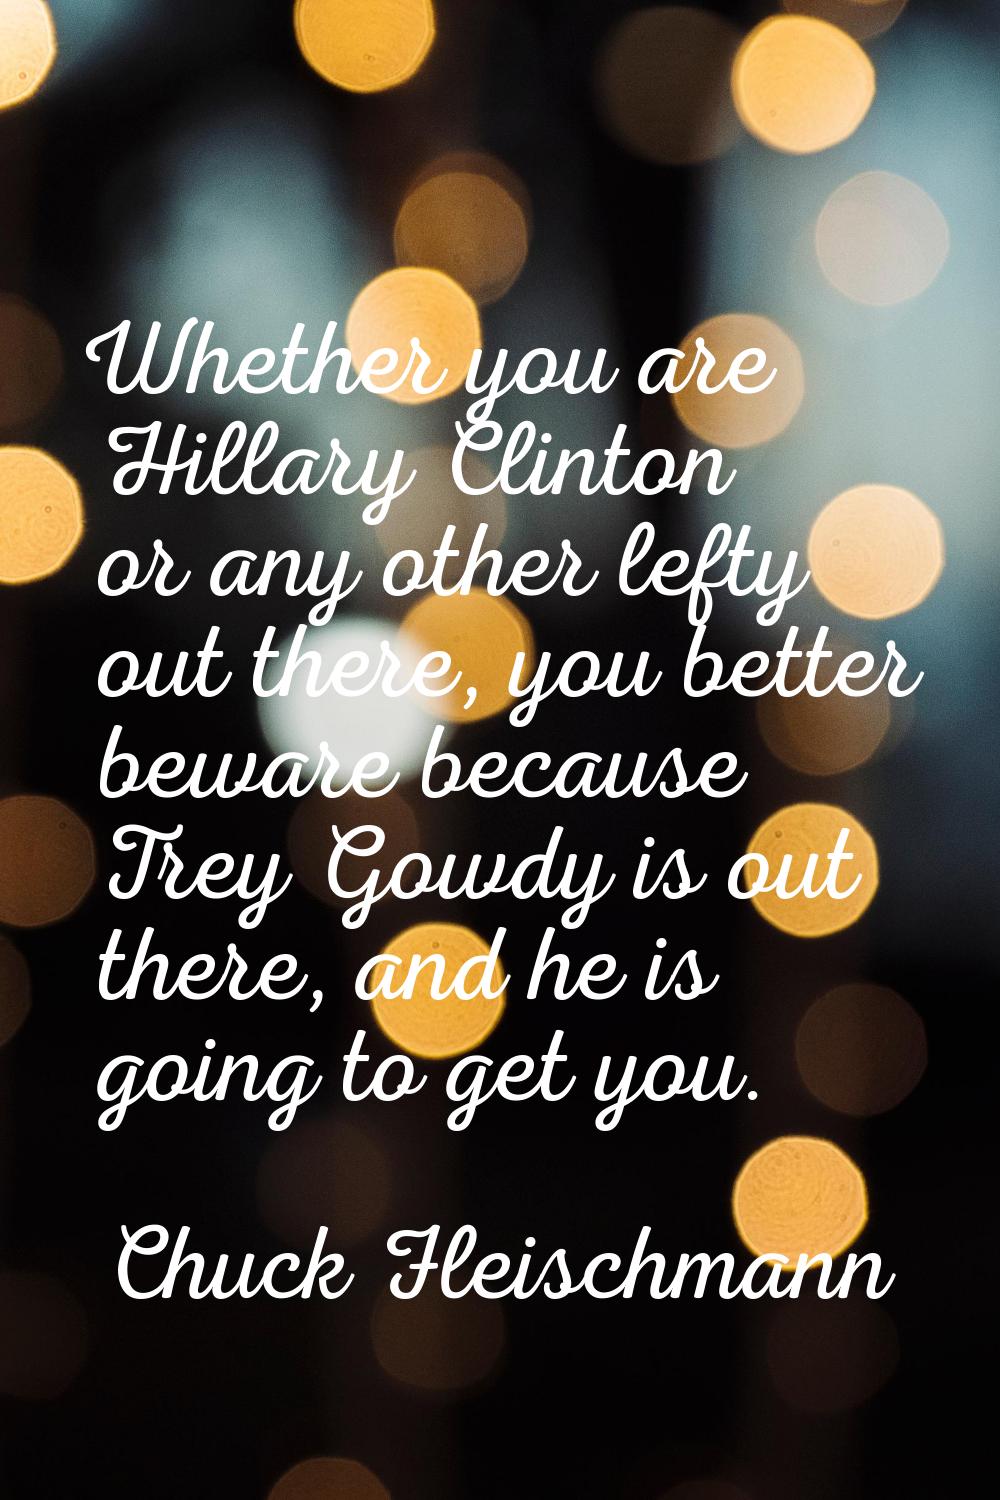 Whether you are Hillary Clinton or any other lefty out there, you better beware because Trey Gowdy 